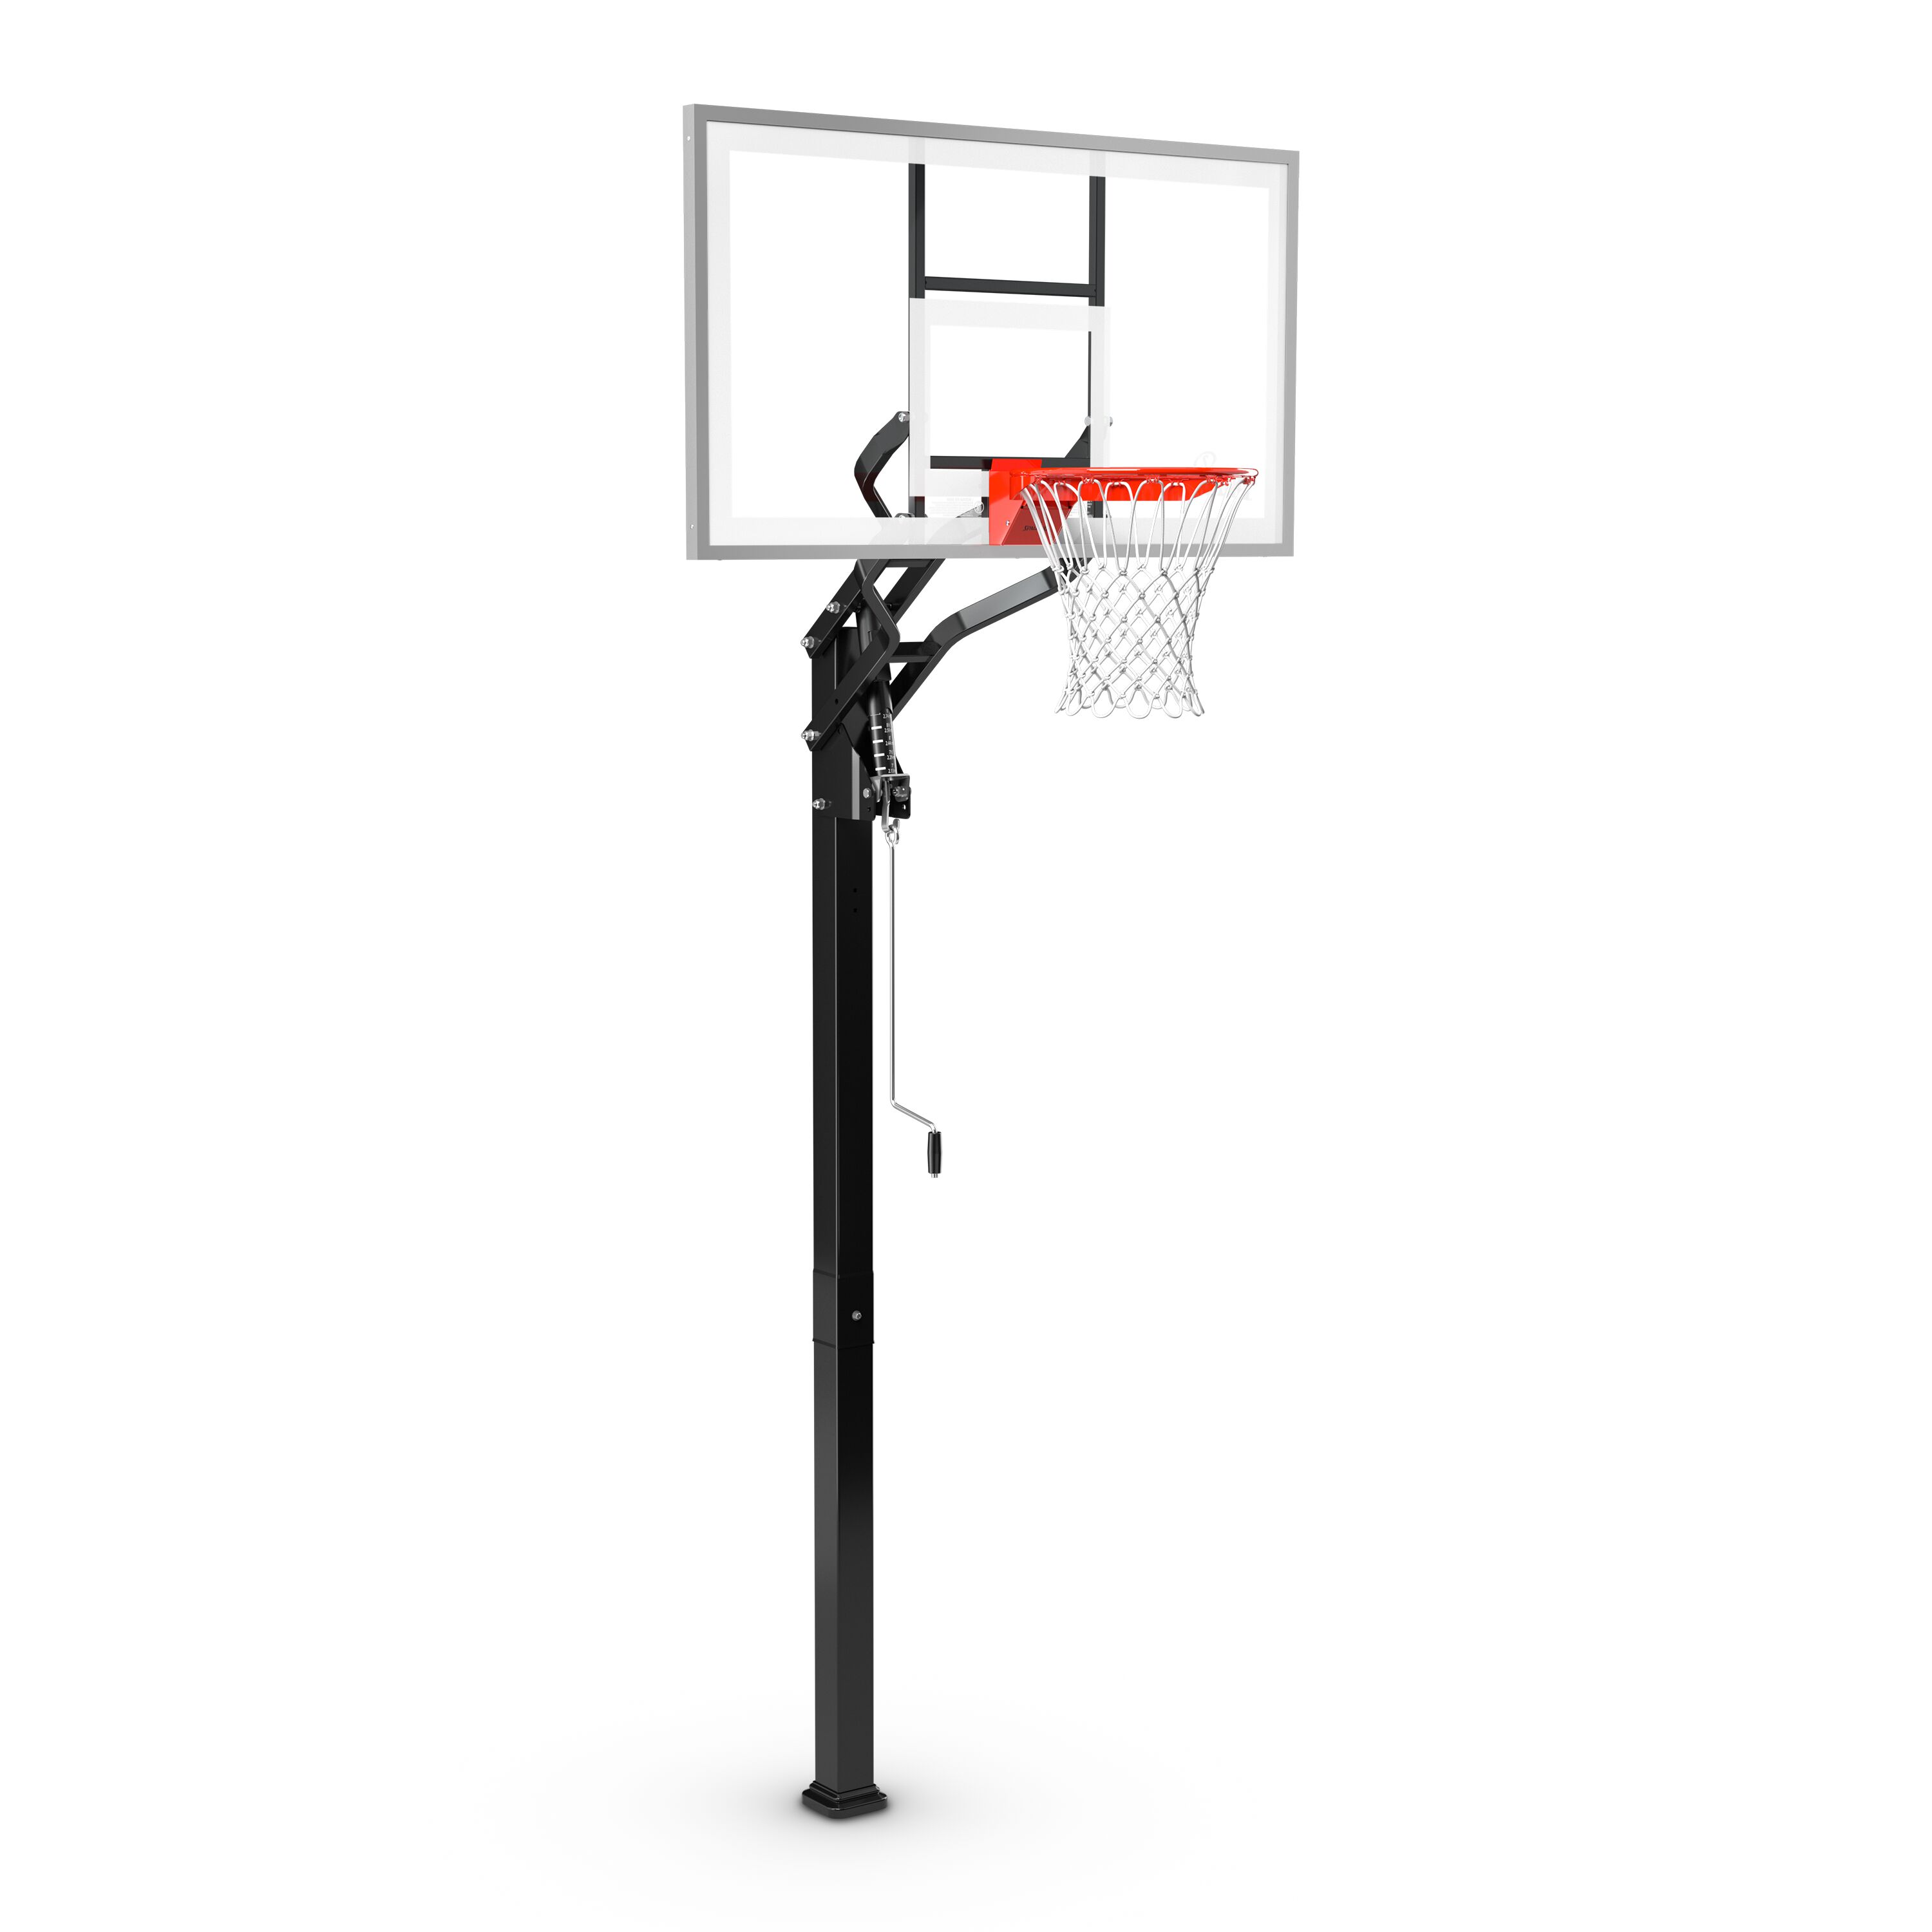 Spalding 60 In. Tempered Glass U-Turn® In Ground Basketball Systems Hoop - image 1 of 6